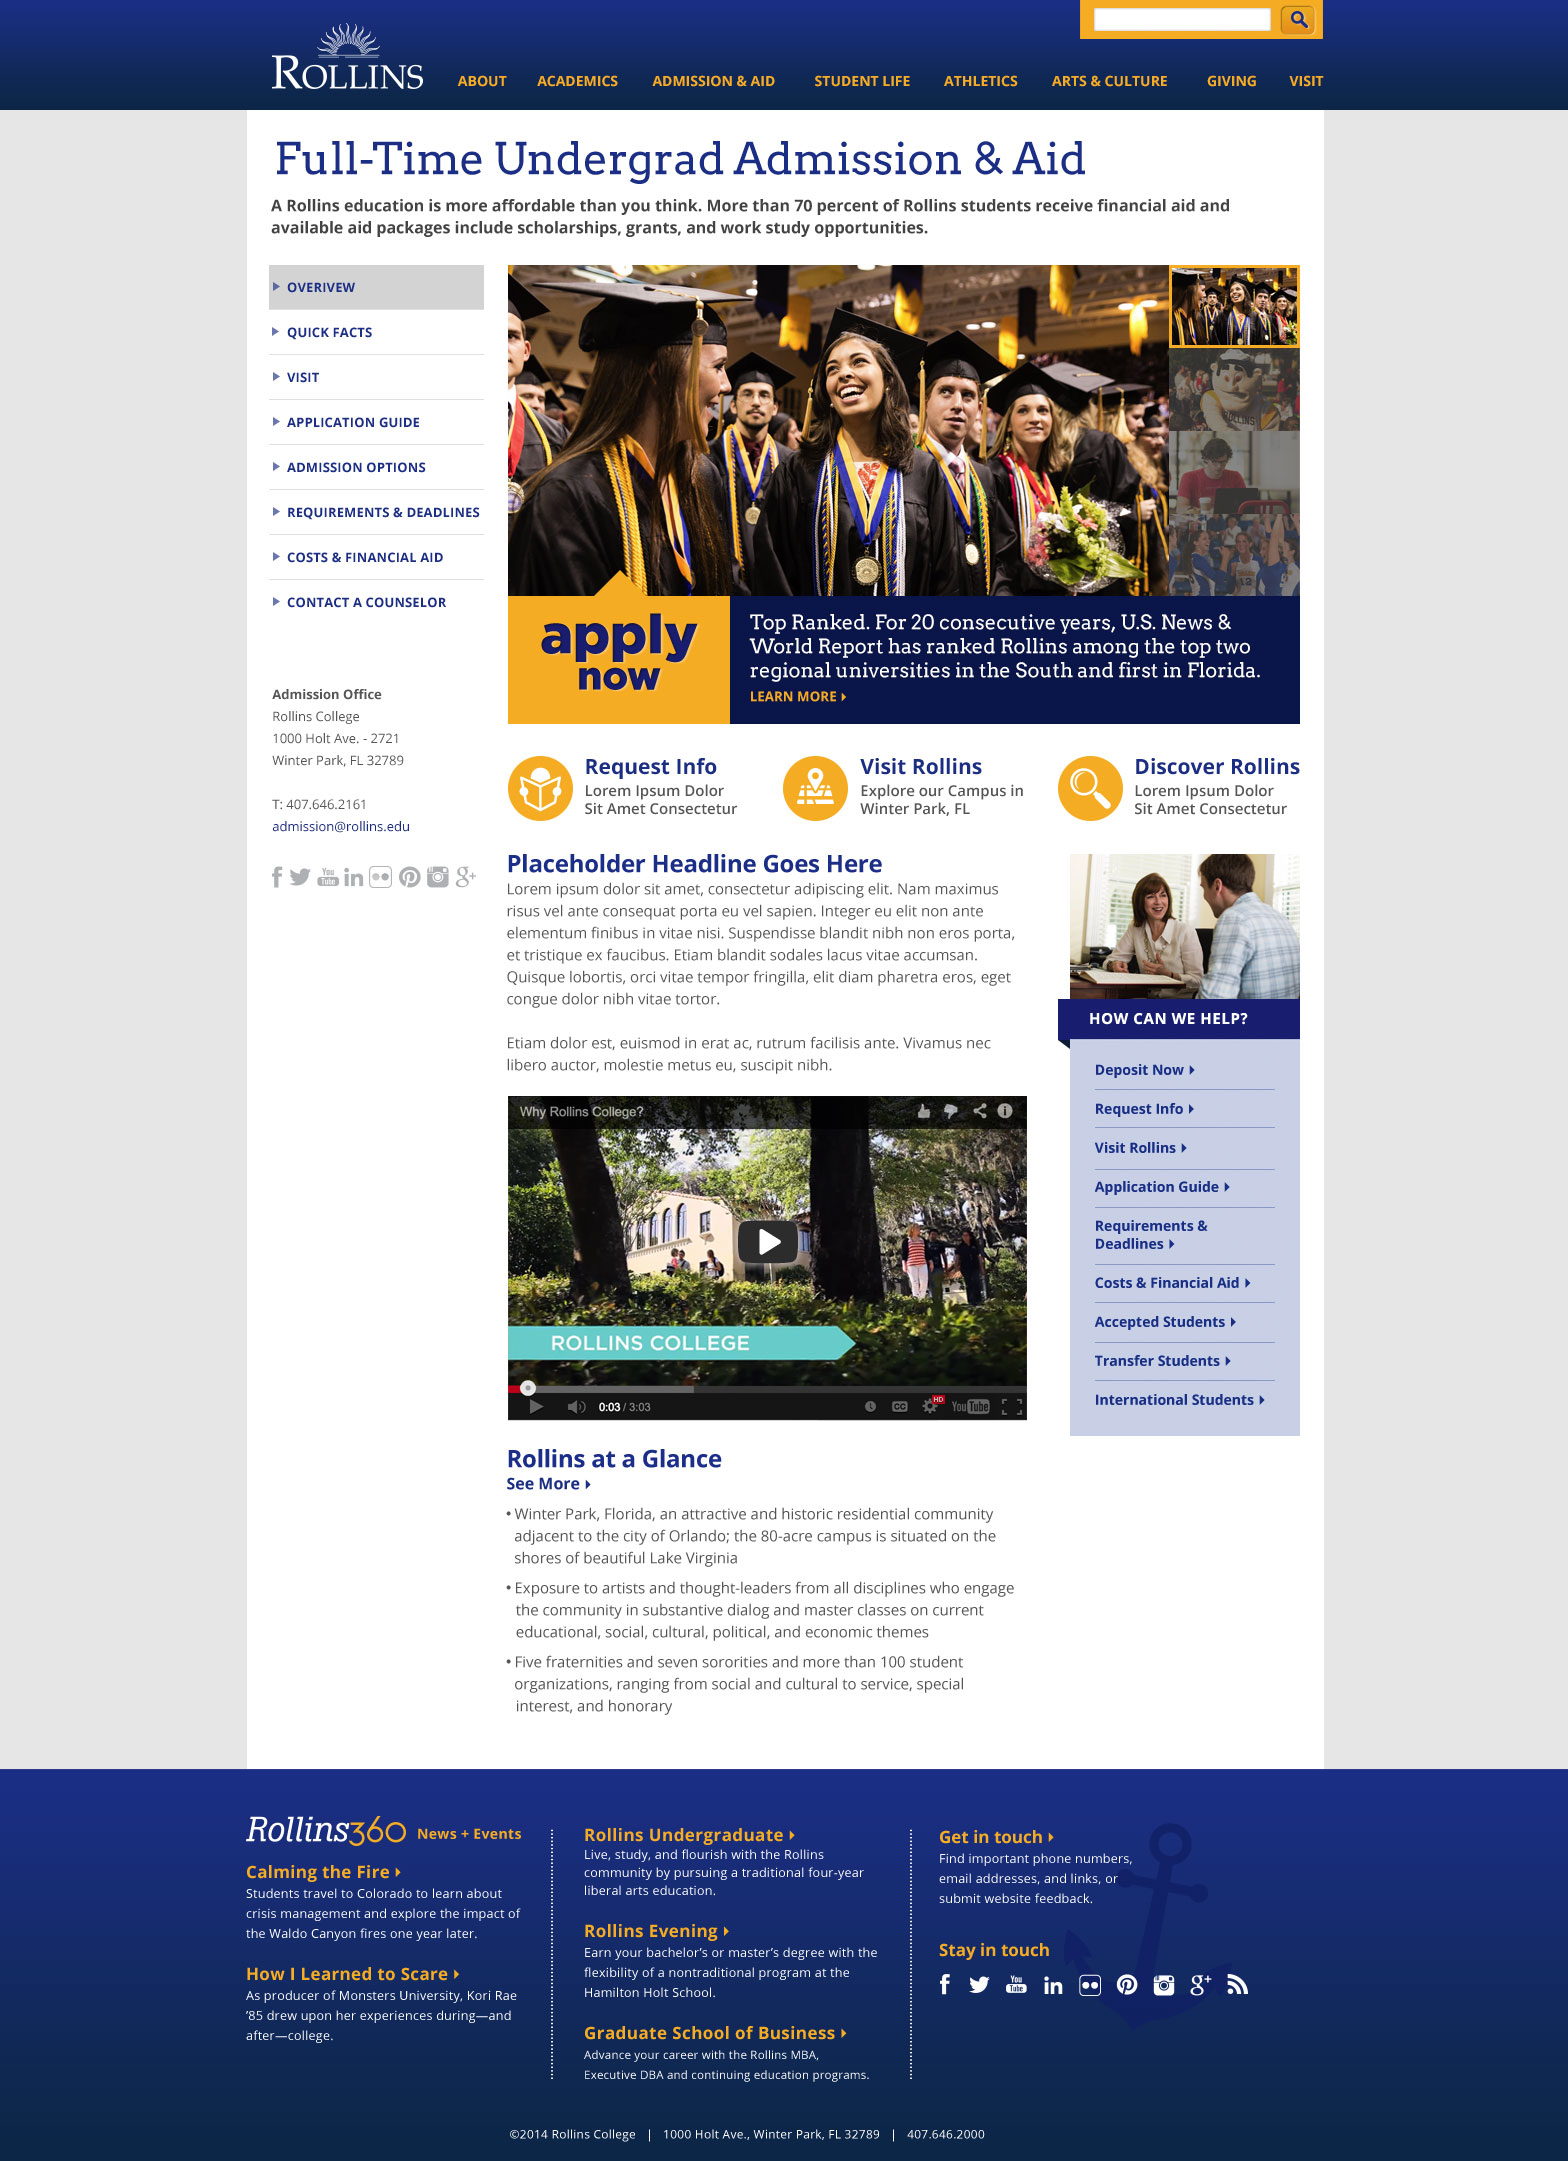 rollins college admissions landing